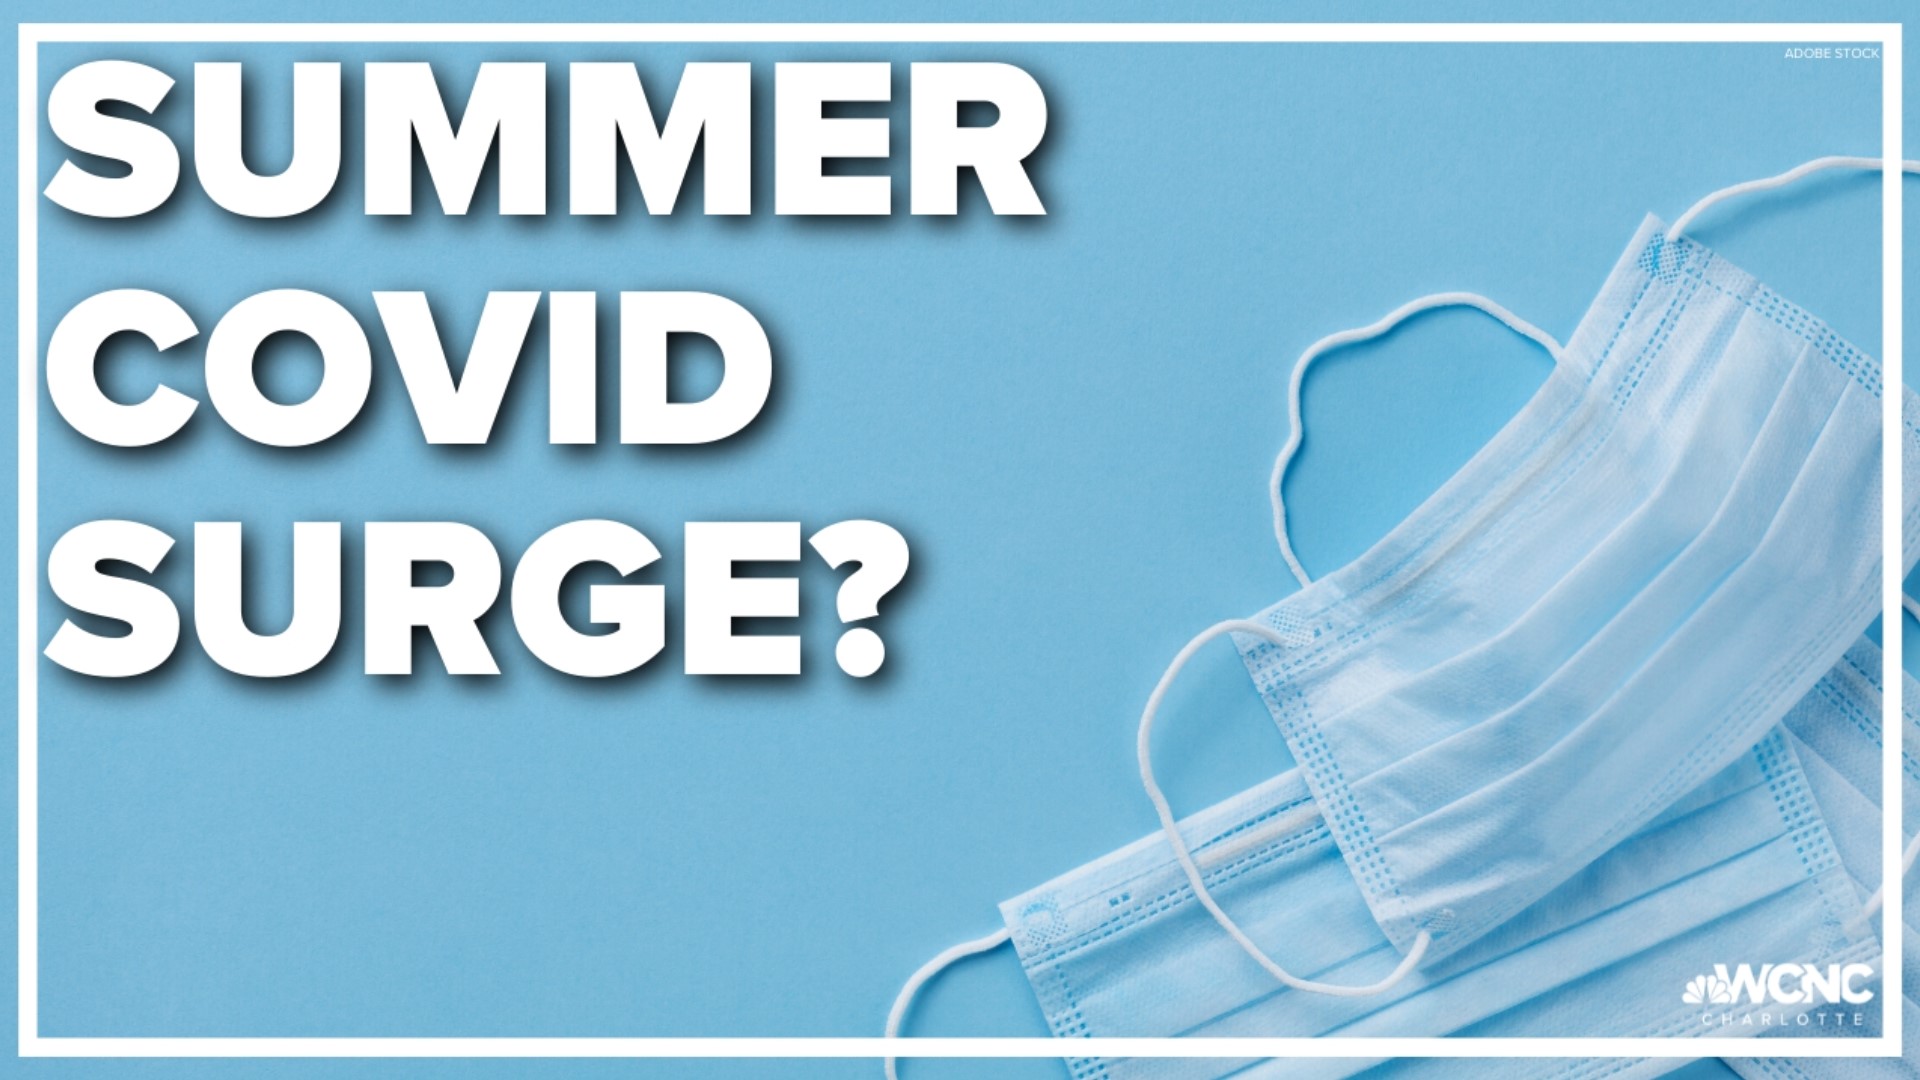 As we see a wave of new COVID-19 cases in the U.S., experts are split on whether we'll see a summer surge.